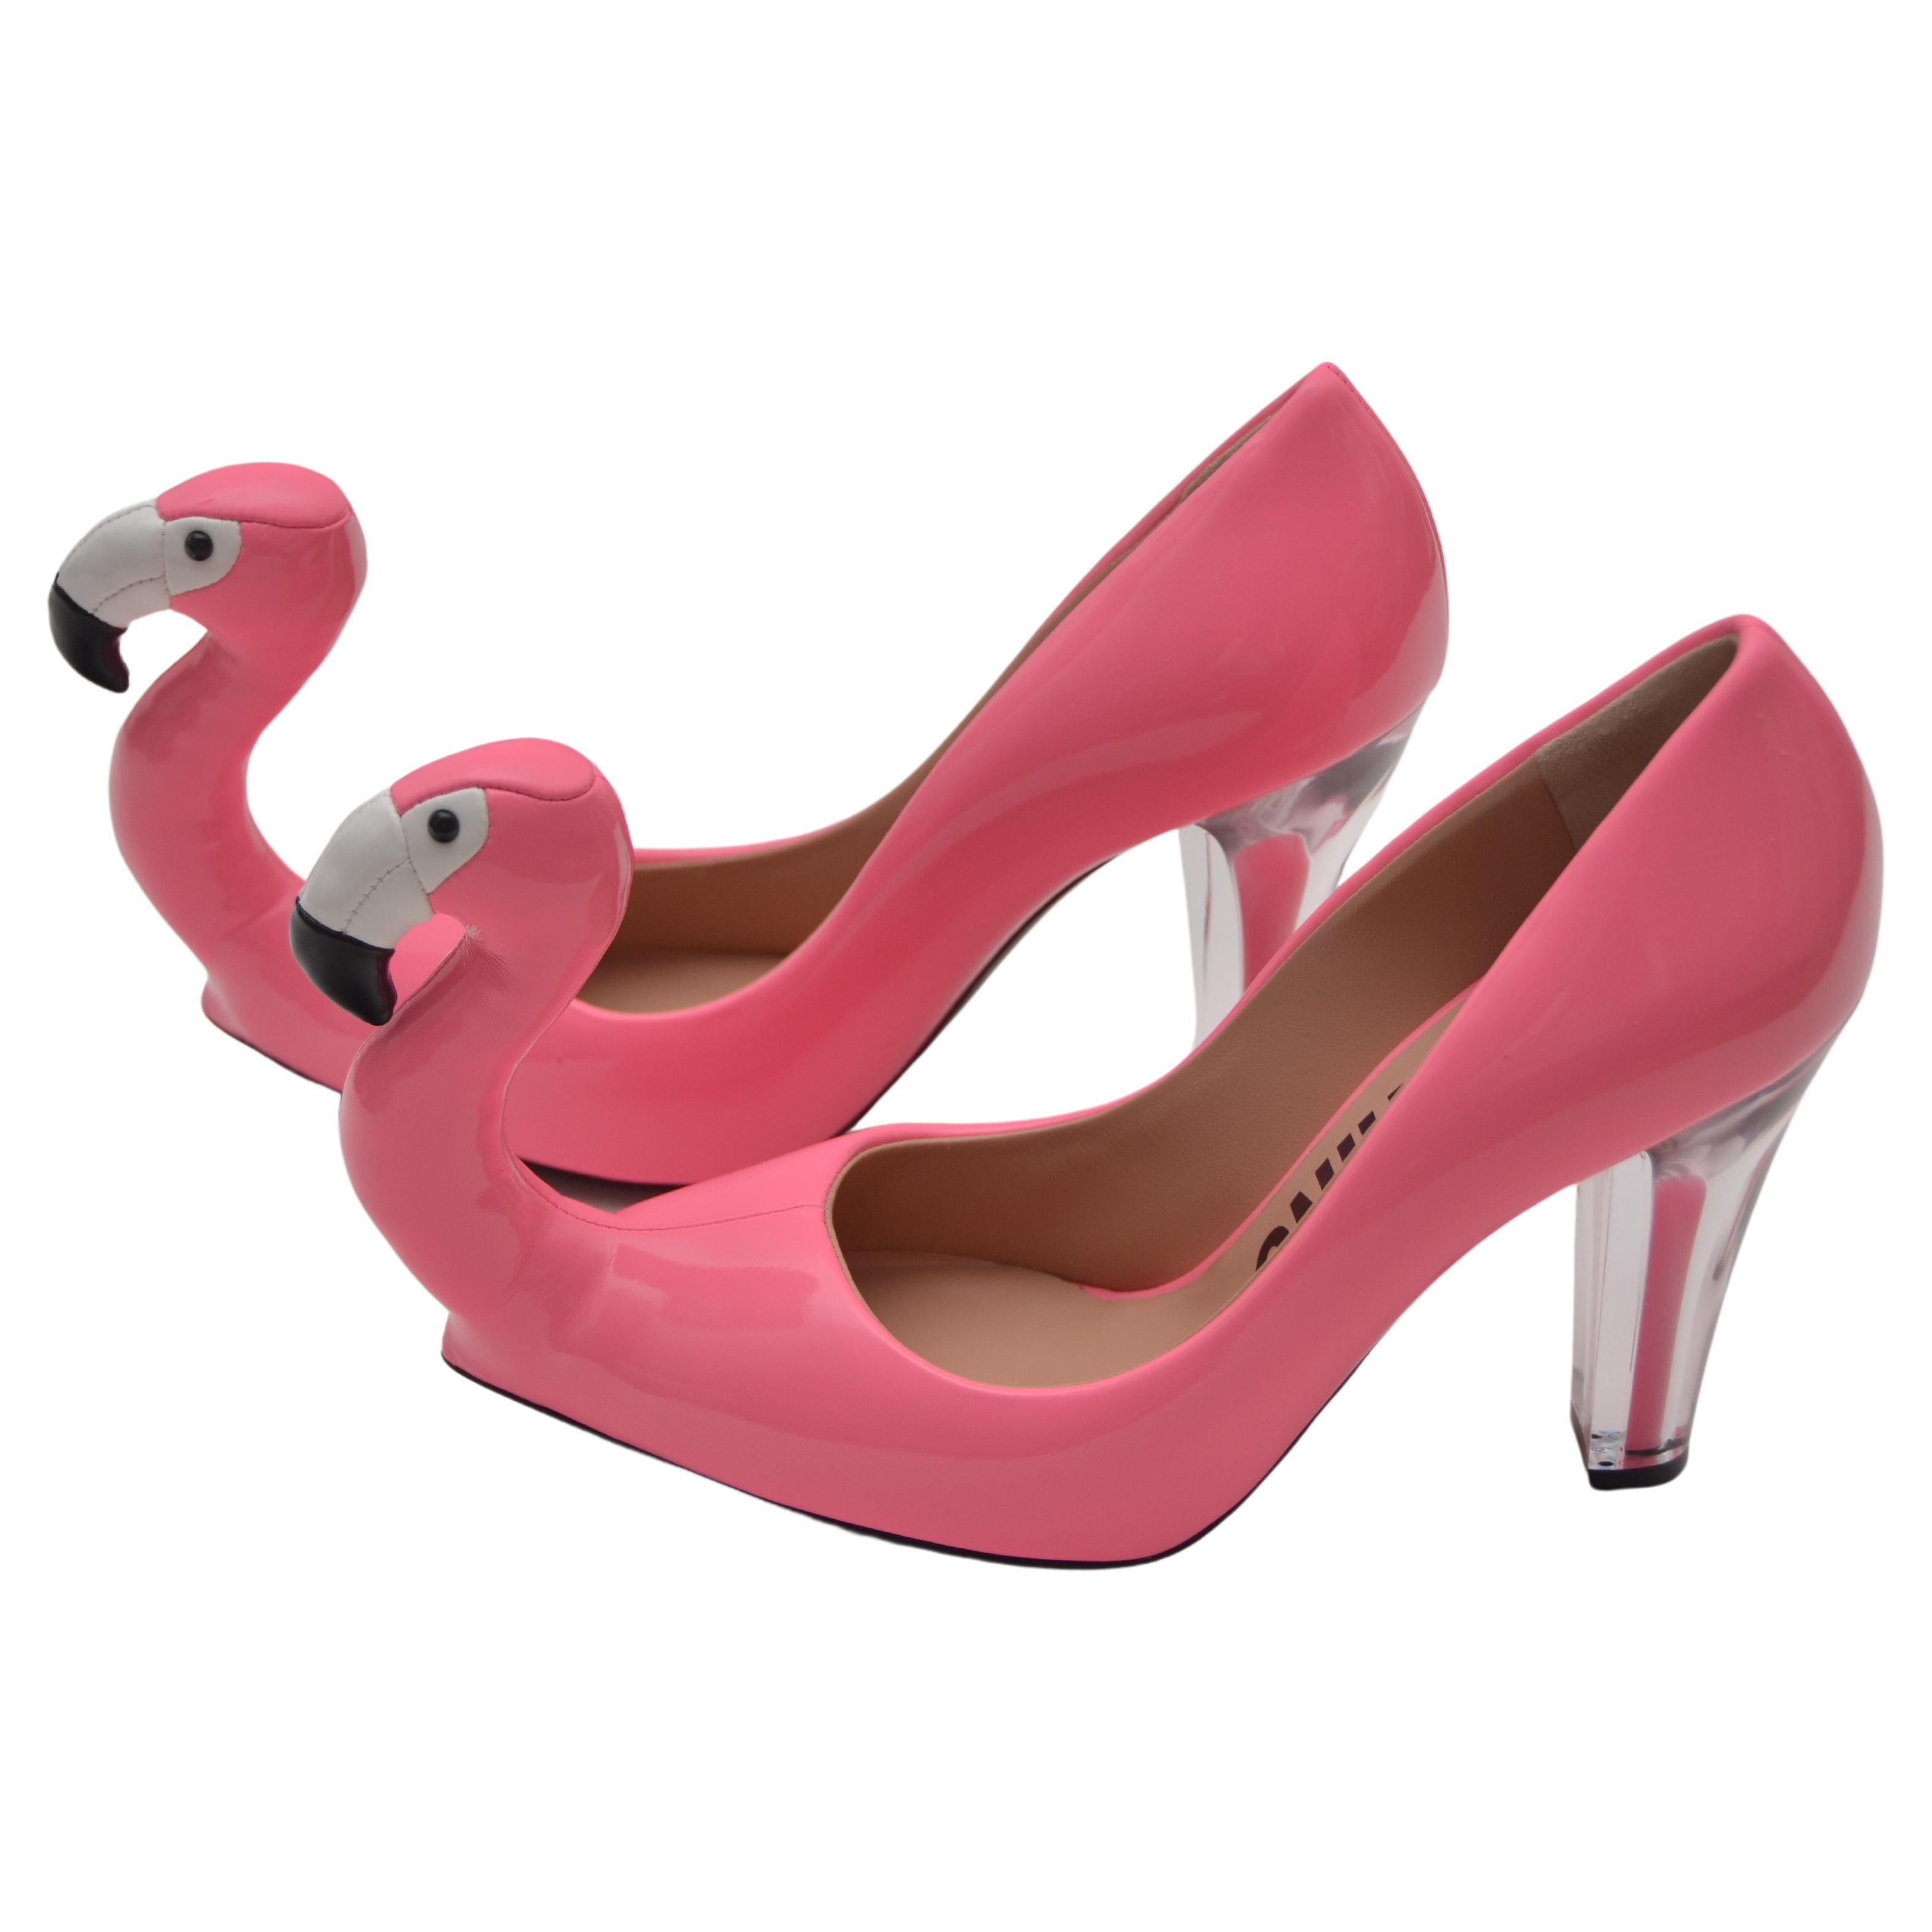 Moschino  Runway Jeremy Scott  Pink Inflatable Flamingo Shoes  Size 40   NEW  For Sale